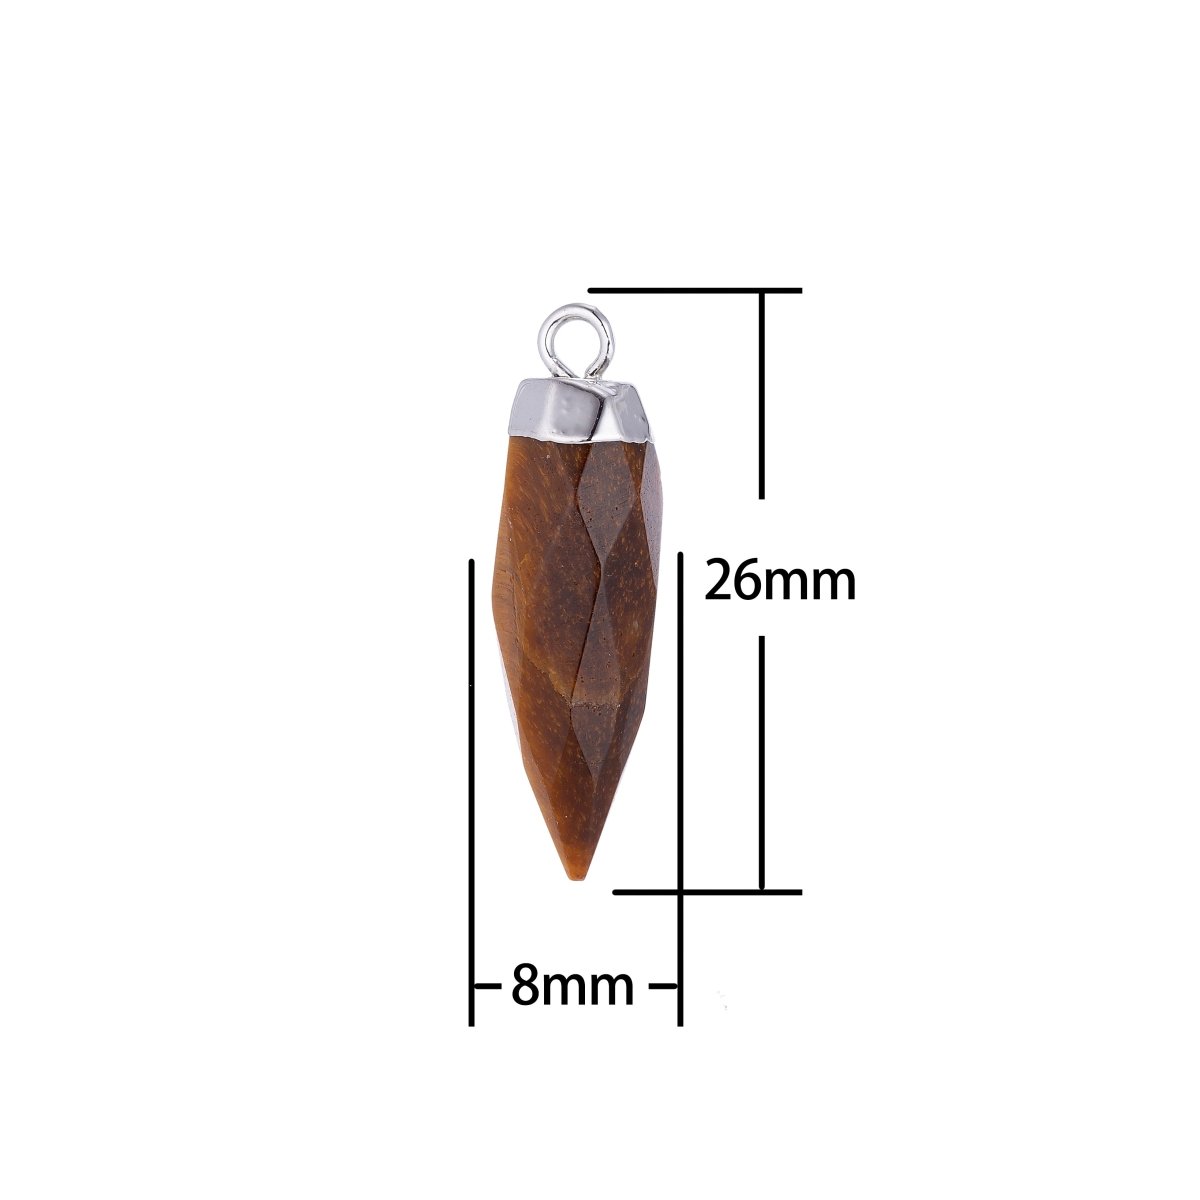 On Sale! CLEARANCE! Delicate Pointed Spike Gemstone Drop Pendant, Dainty Bullet Gemstone Charms Amethyst, Tiger Eye, Quartz, Onyx, Agate for Necklace Earring | E-333 E-334 E-335 E-336 - DLUXCA